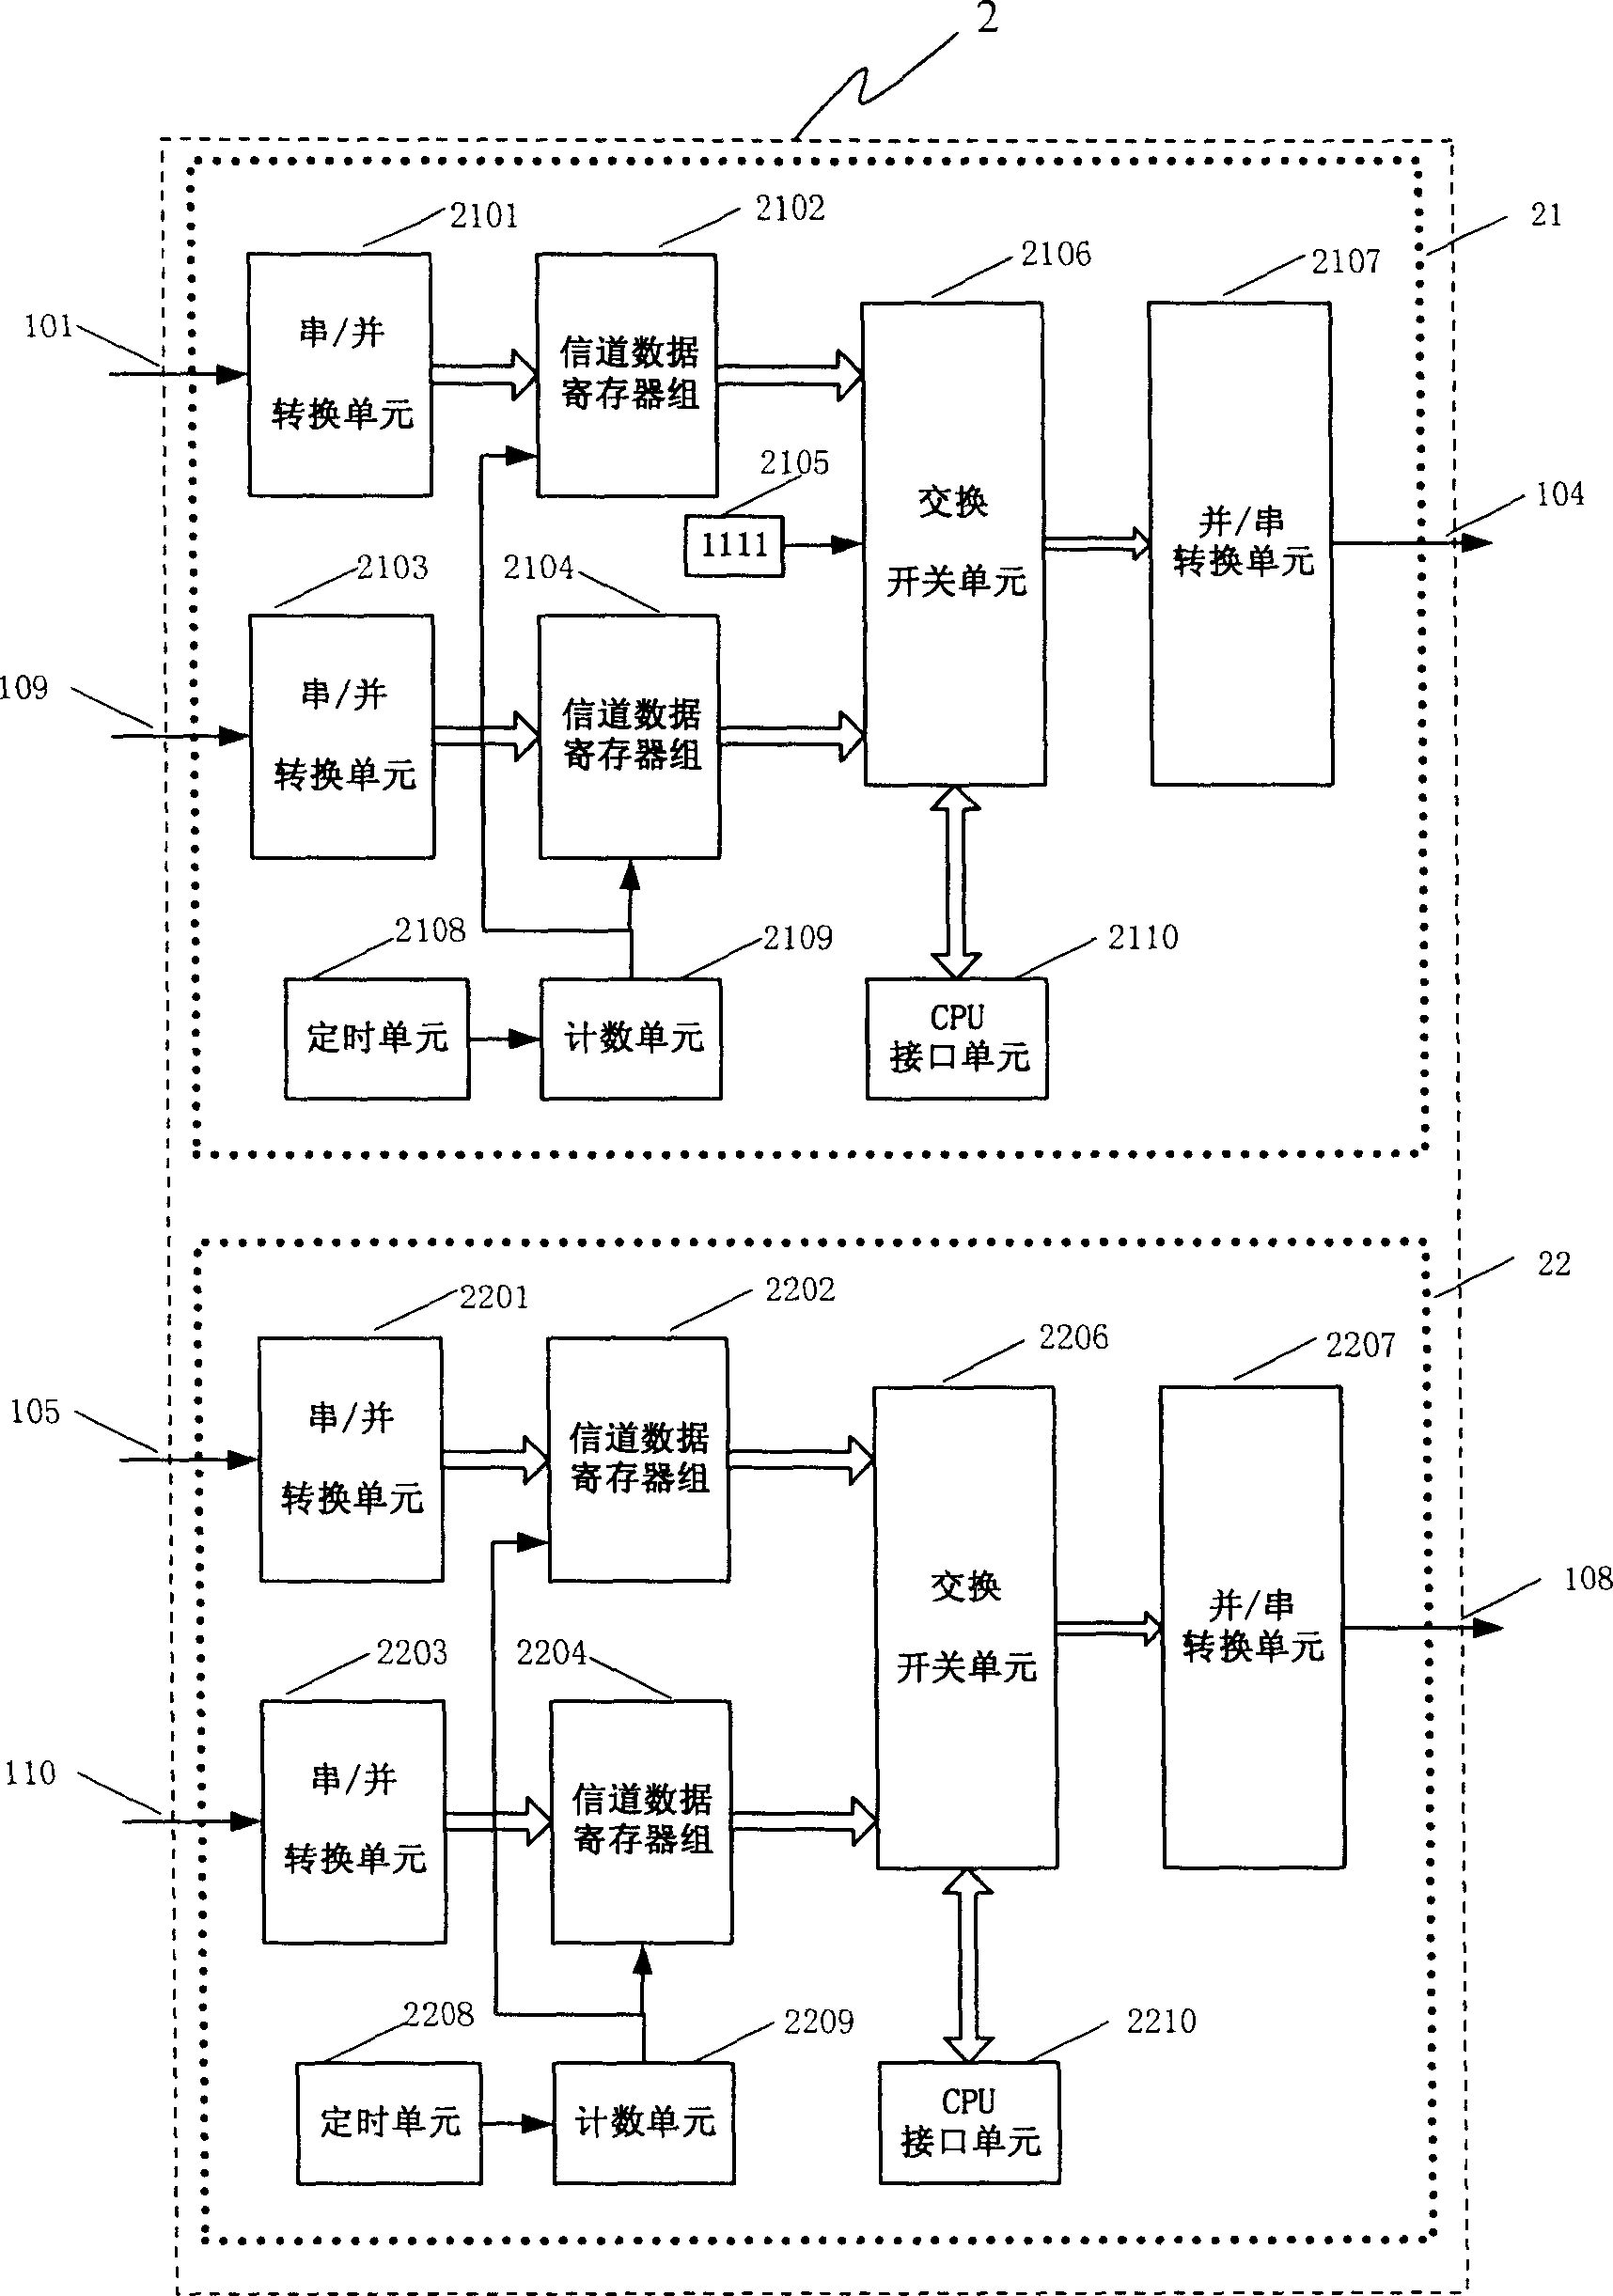 Method and device for implementing channel data exchange and rate adaption using programmable device